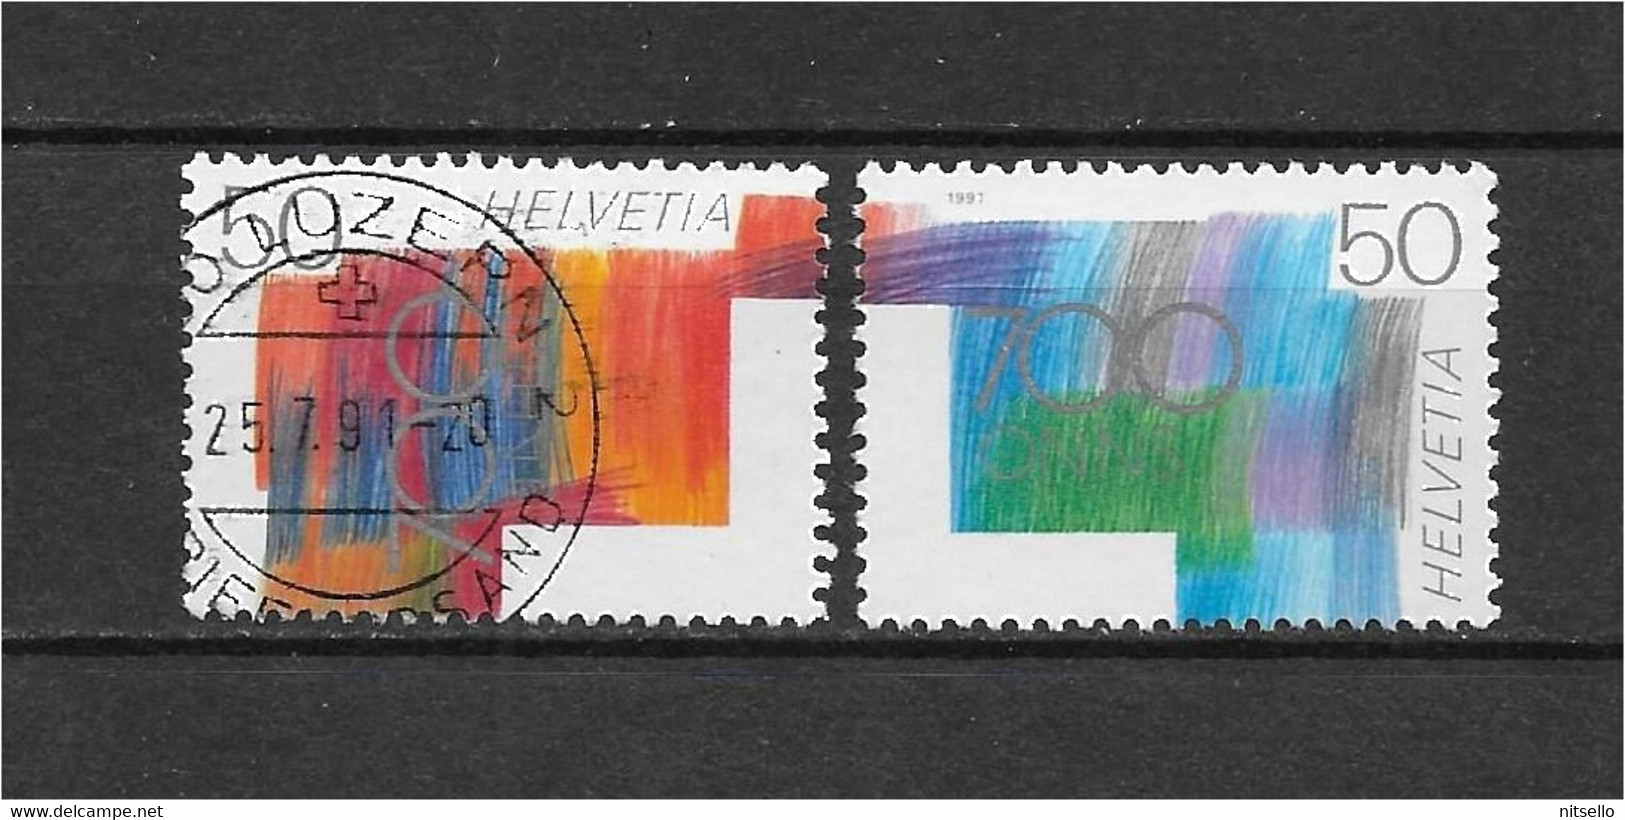 LOTE 1530A /// SUIZA YVERT Nº: 1368/1369  ¡¡¡ OFERTA - LIQUIDATION - JE LIQUIDE !!! - Used Stamps